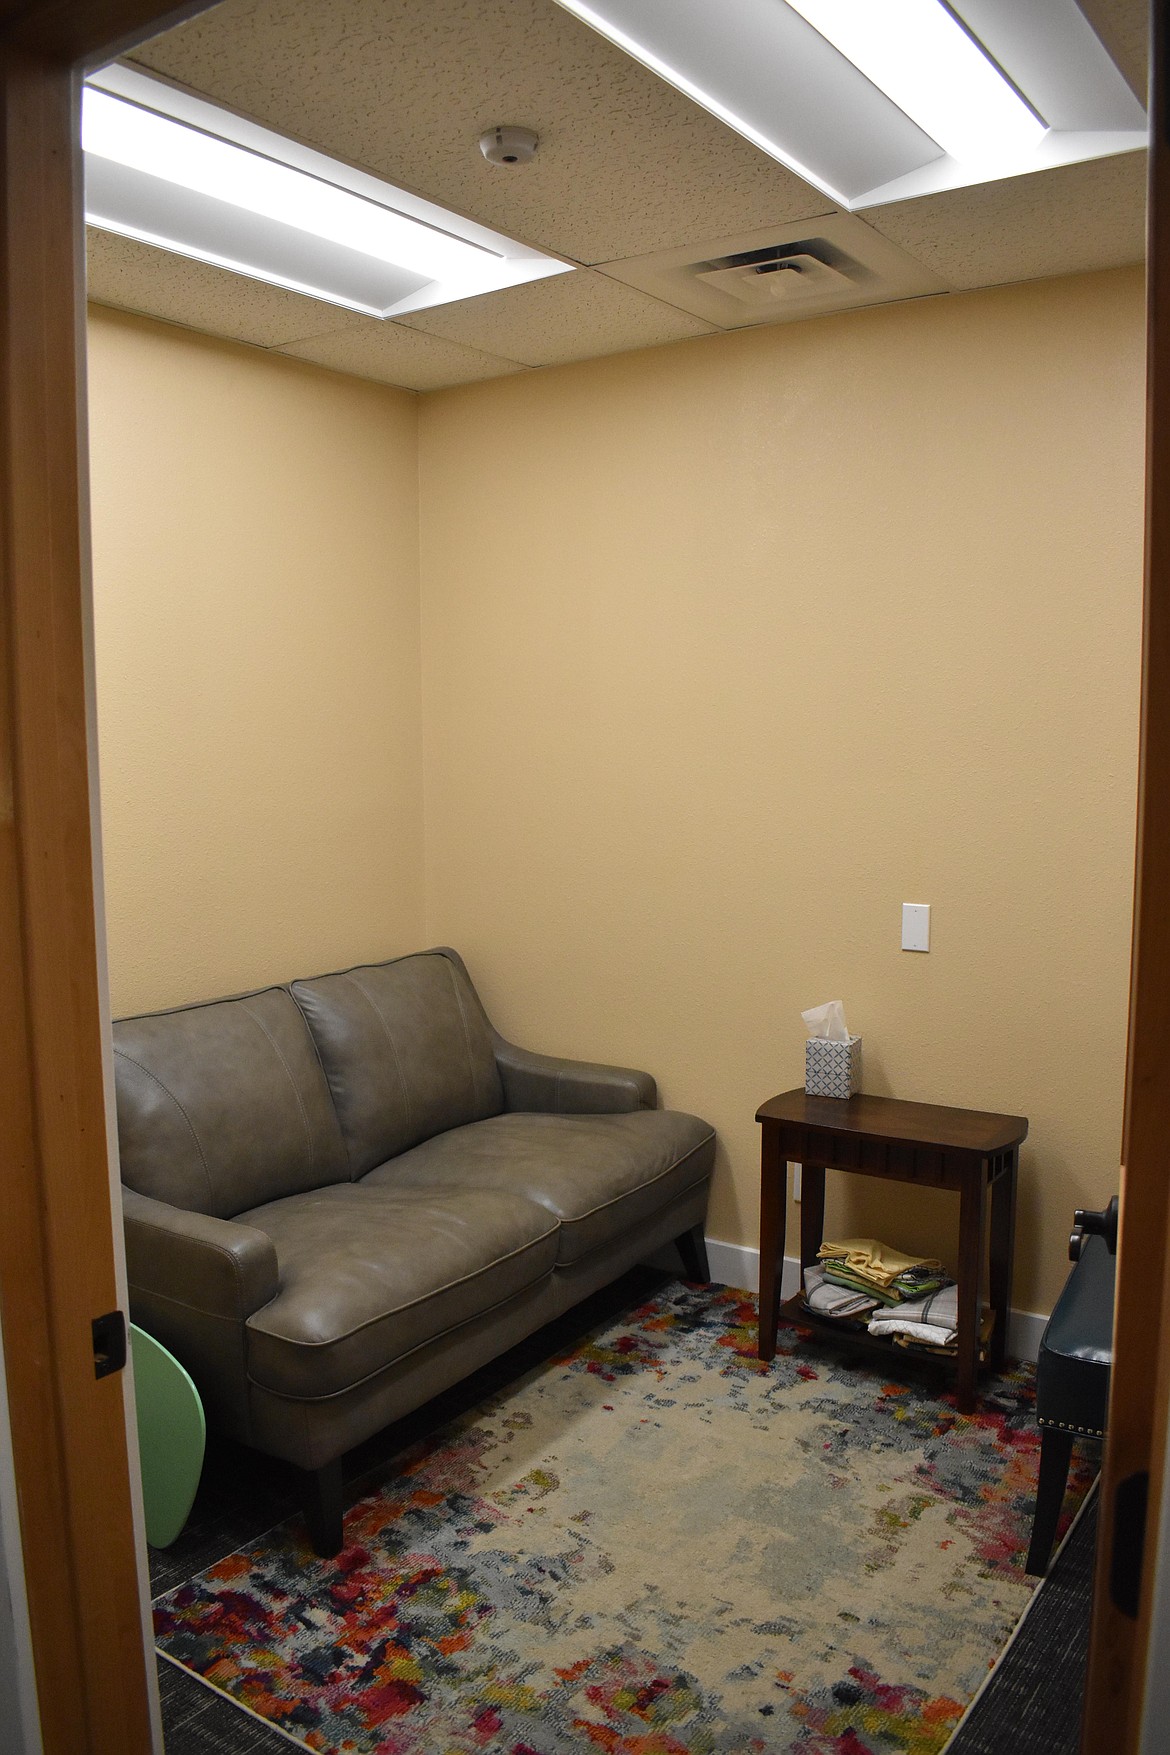 The forensic interview room at Kids Hope has hidden microphones and cameras for law enforcement to observe during the interview of a child.